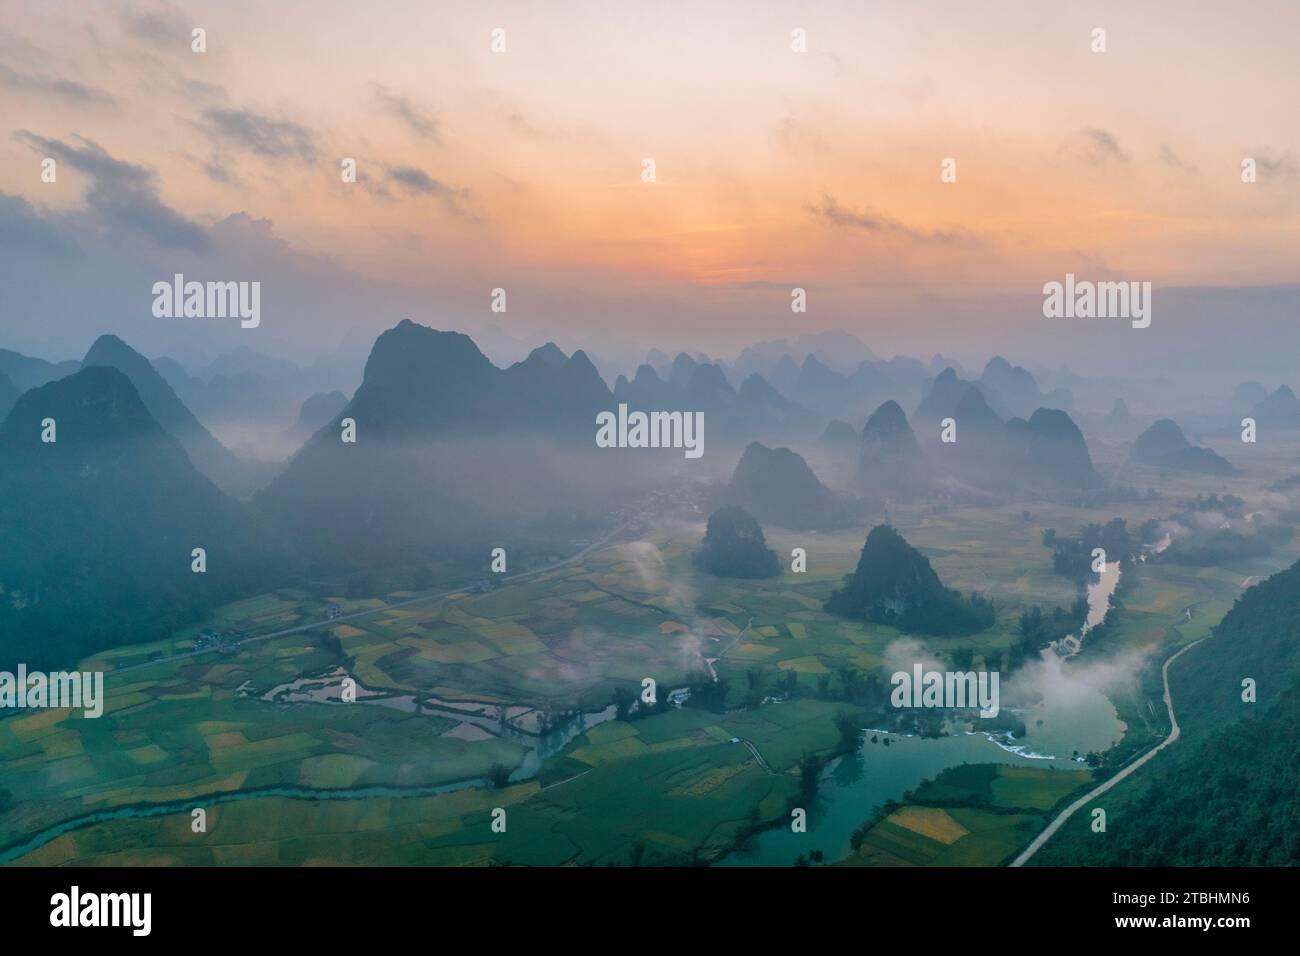 Scenery of Ngoc Con mountain, Cao Bang province, Vietnam filled with mist in the early morning Stock Photo